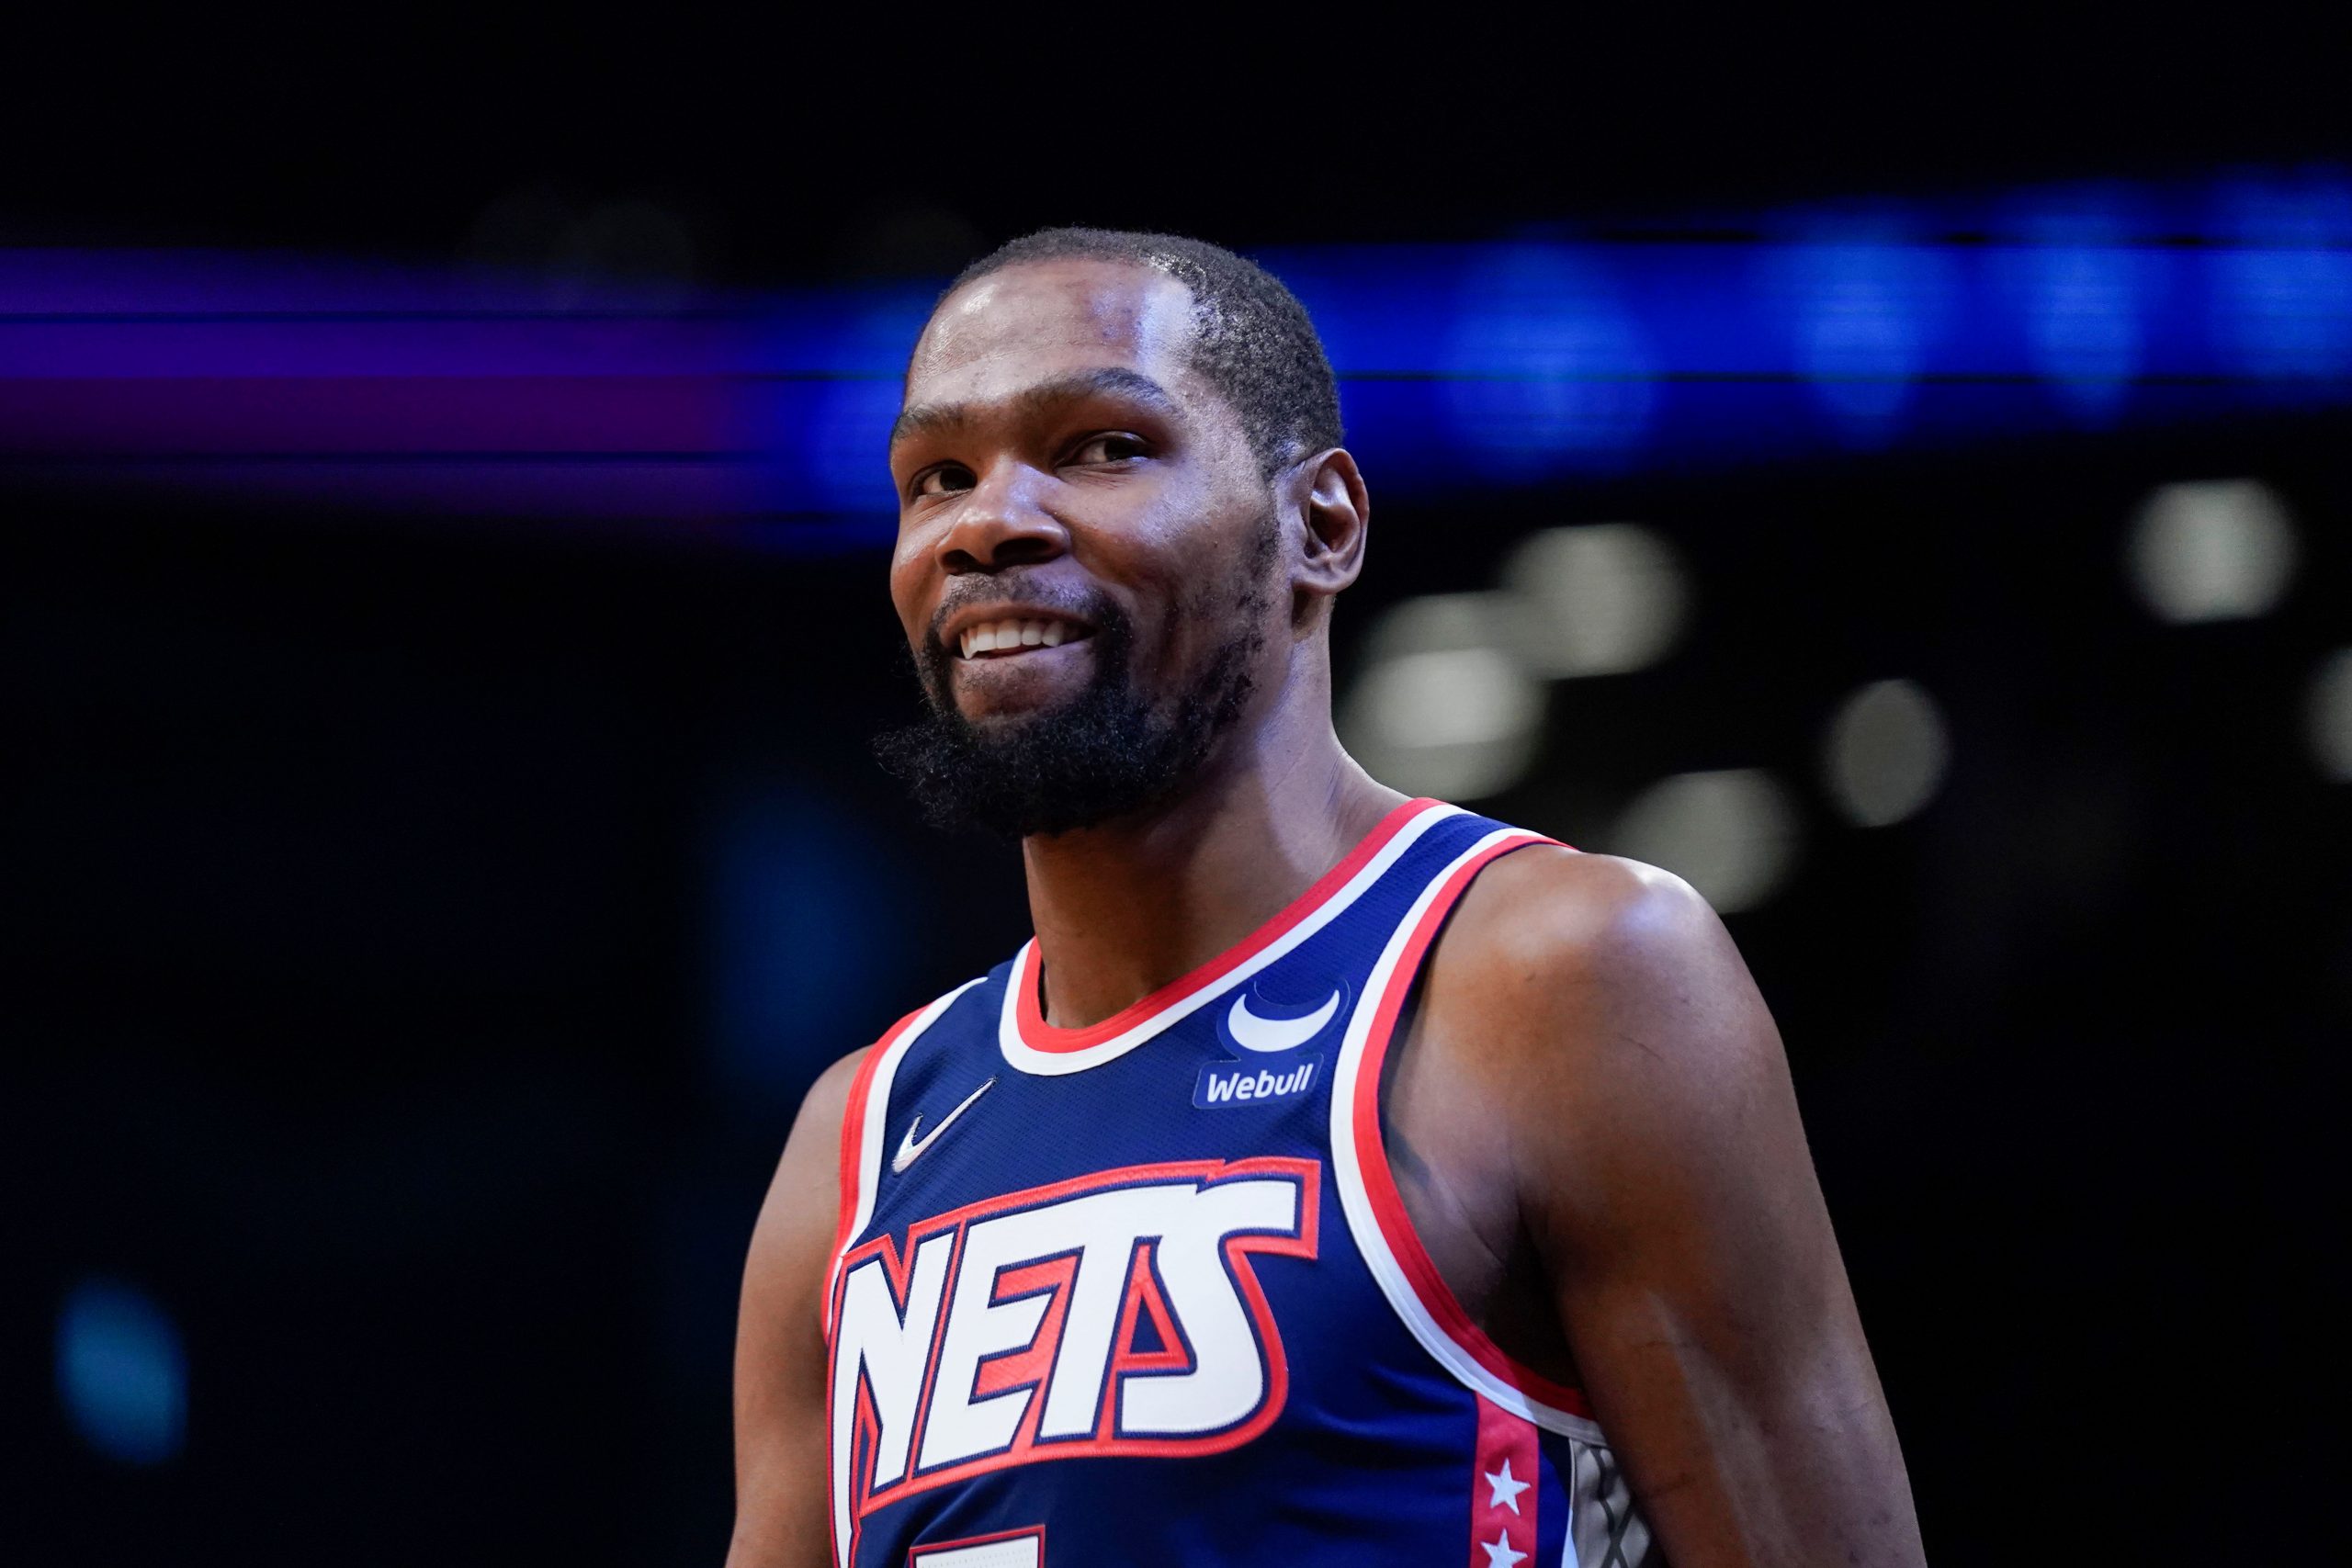 NBA: Durant sticks with Nets, both parties ‘will move forward together’